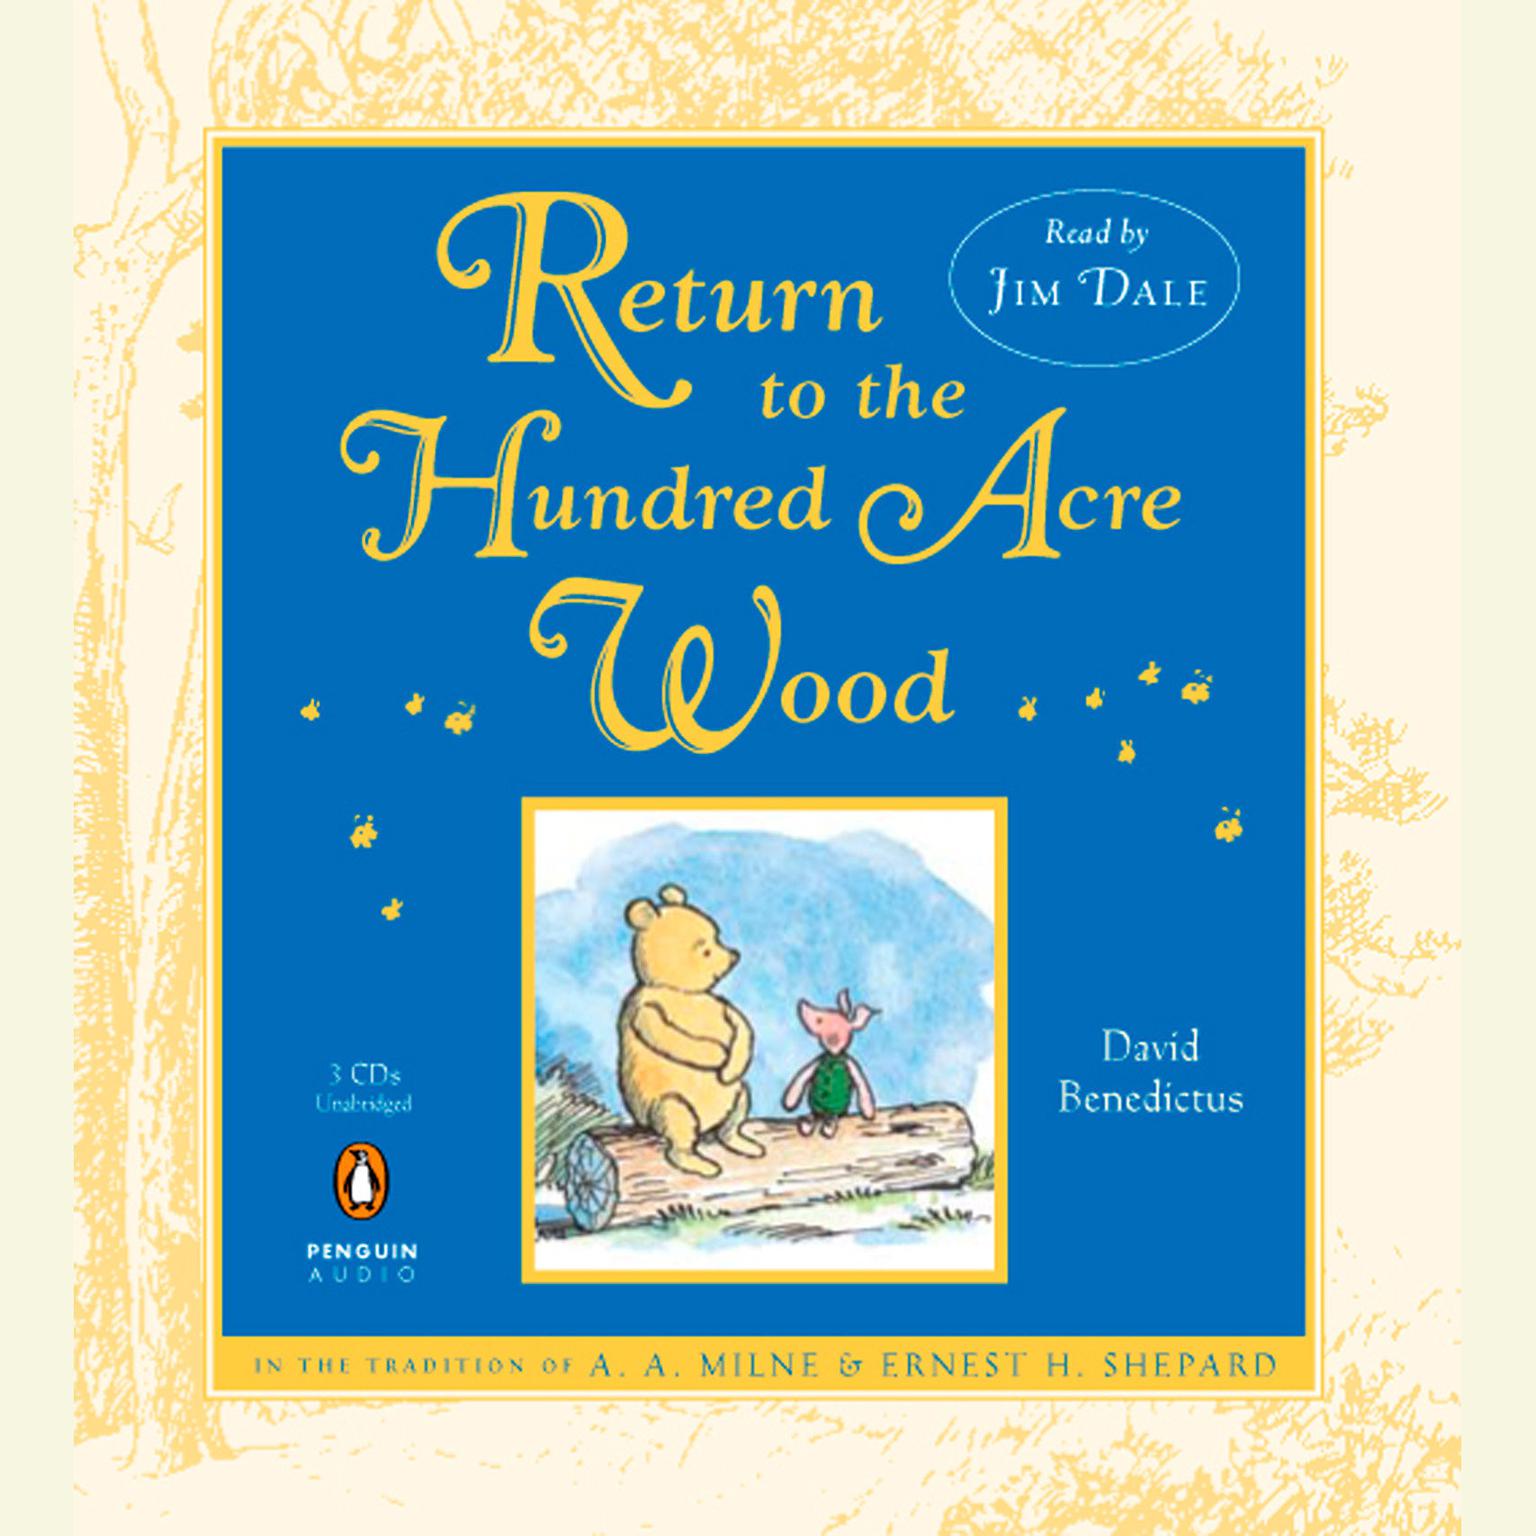 return-to-the-hundred-acre-wood-audiobook-by-david-benedictus